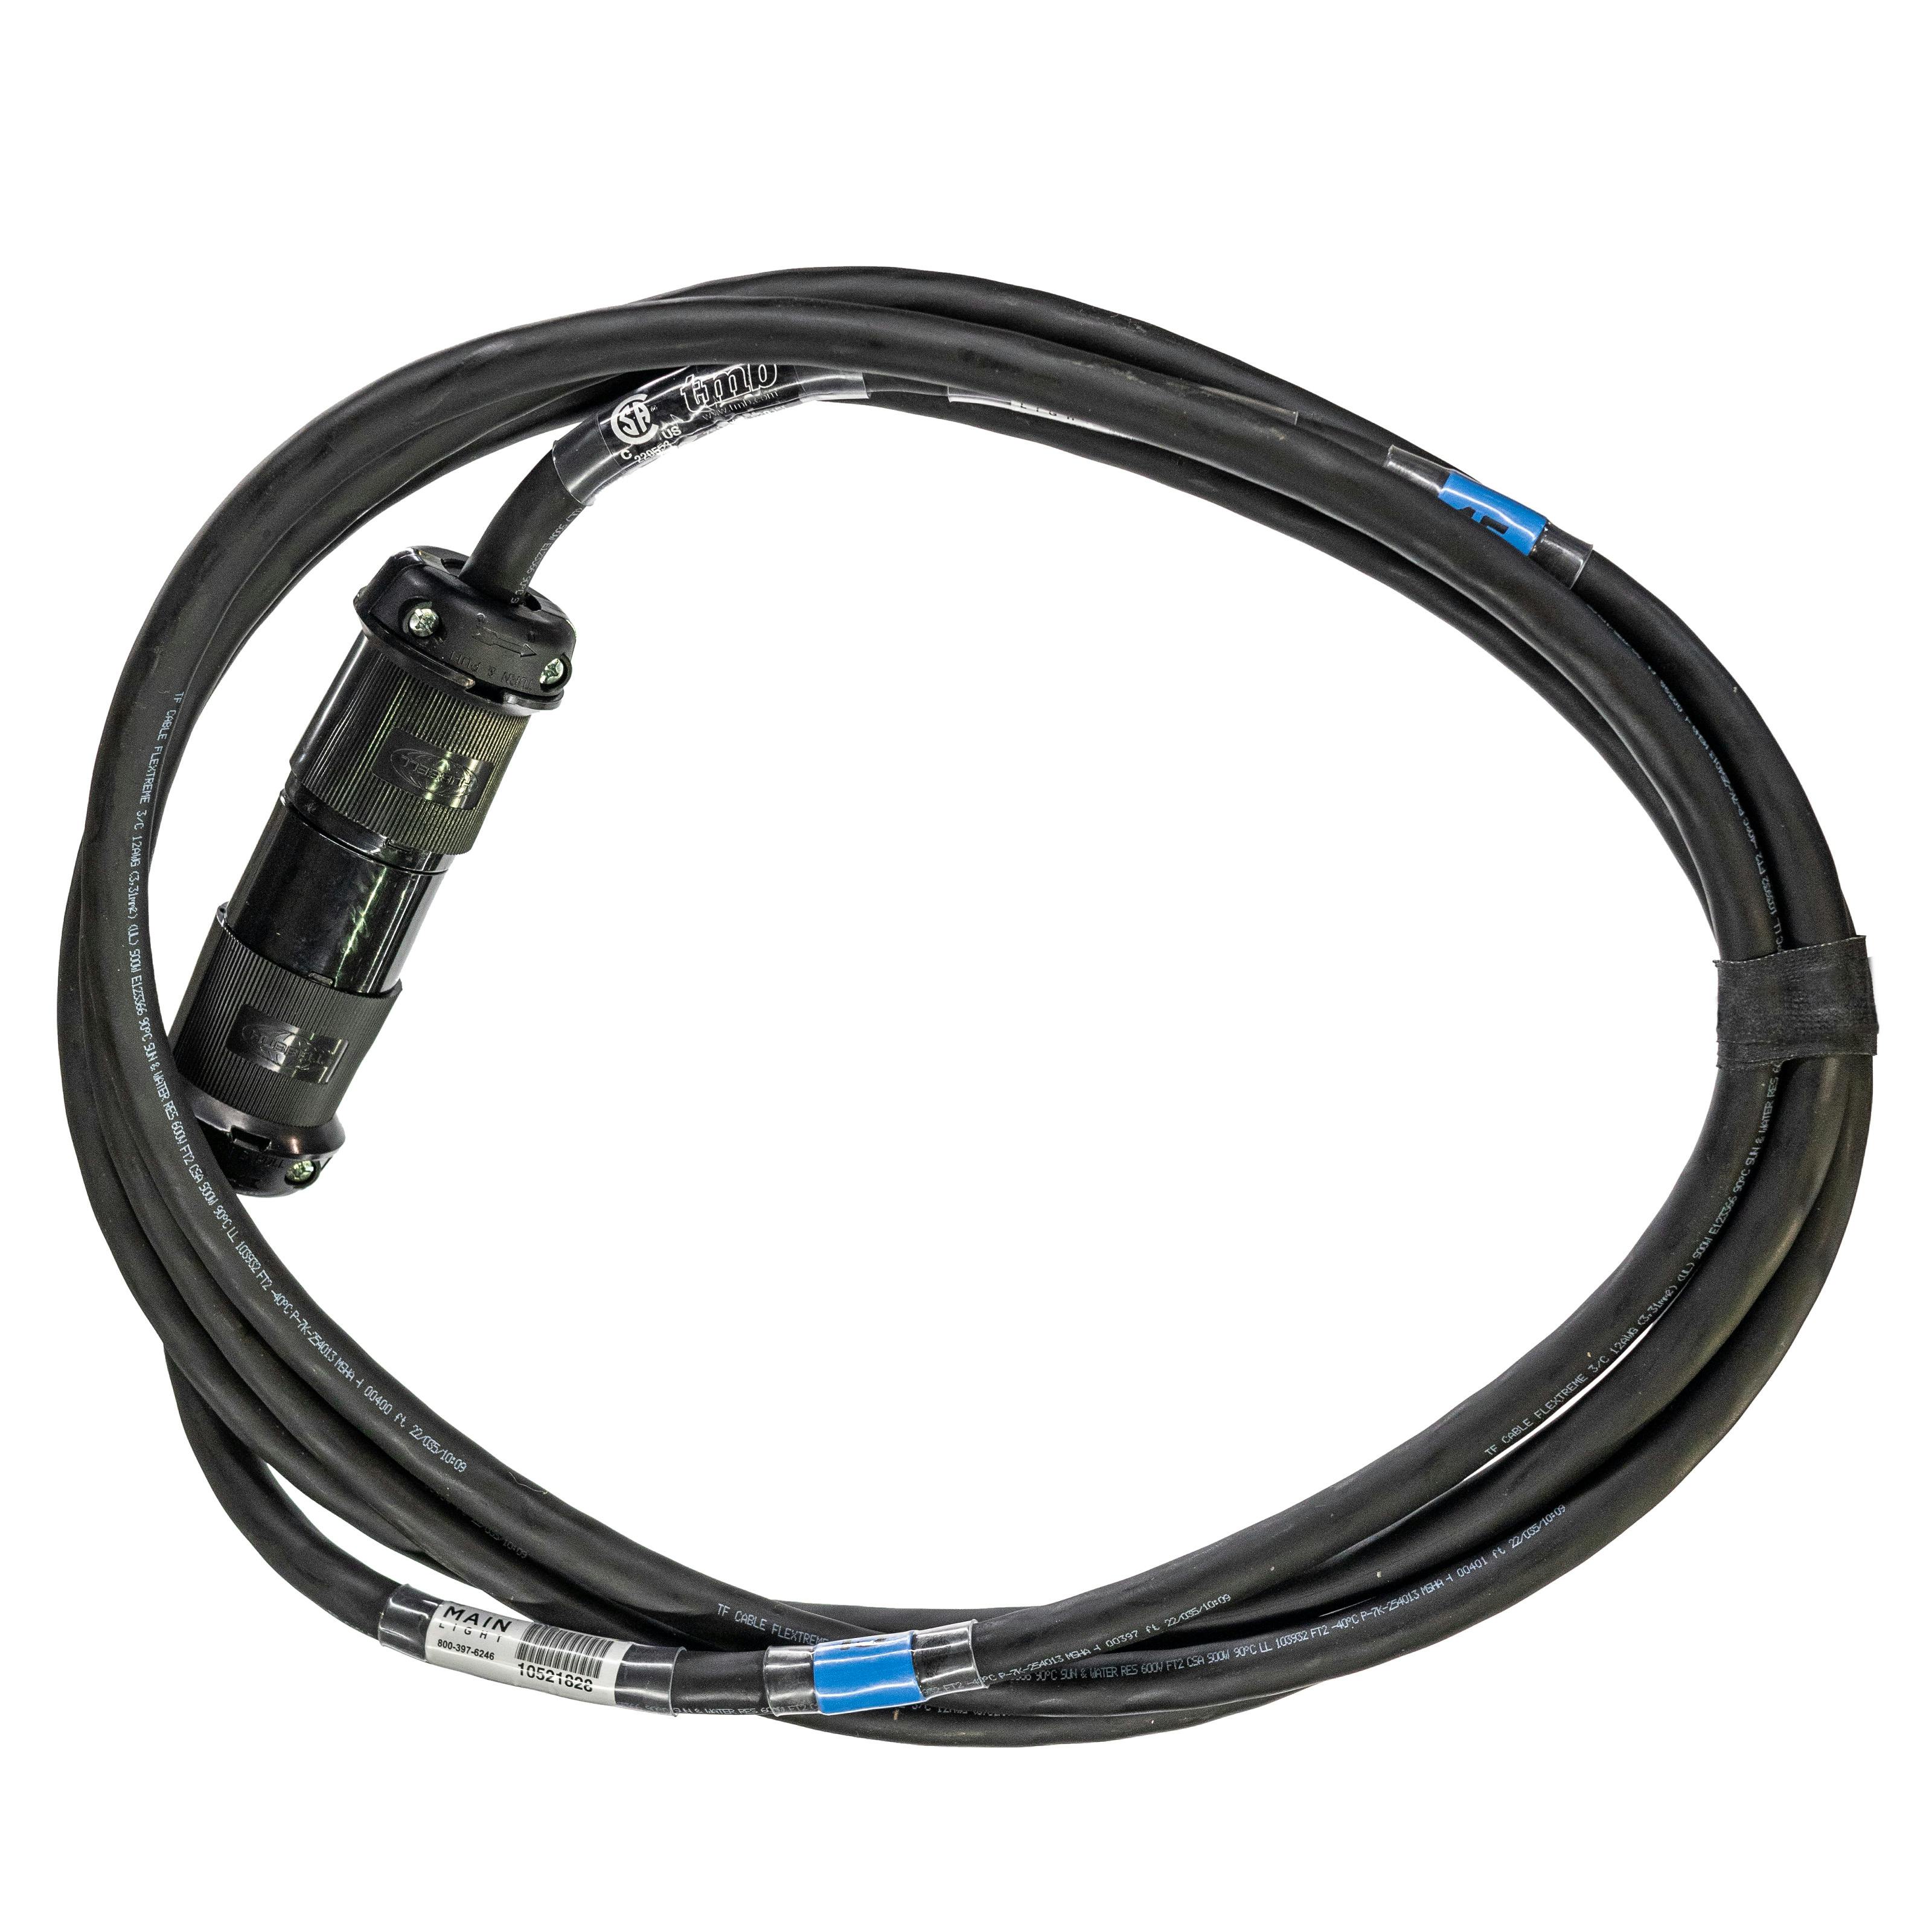 Cable -- L6-20 12/3 -- 15'